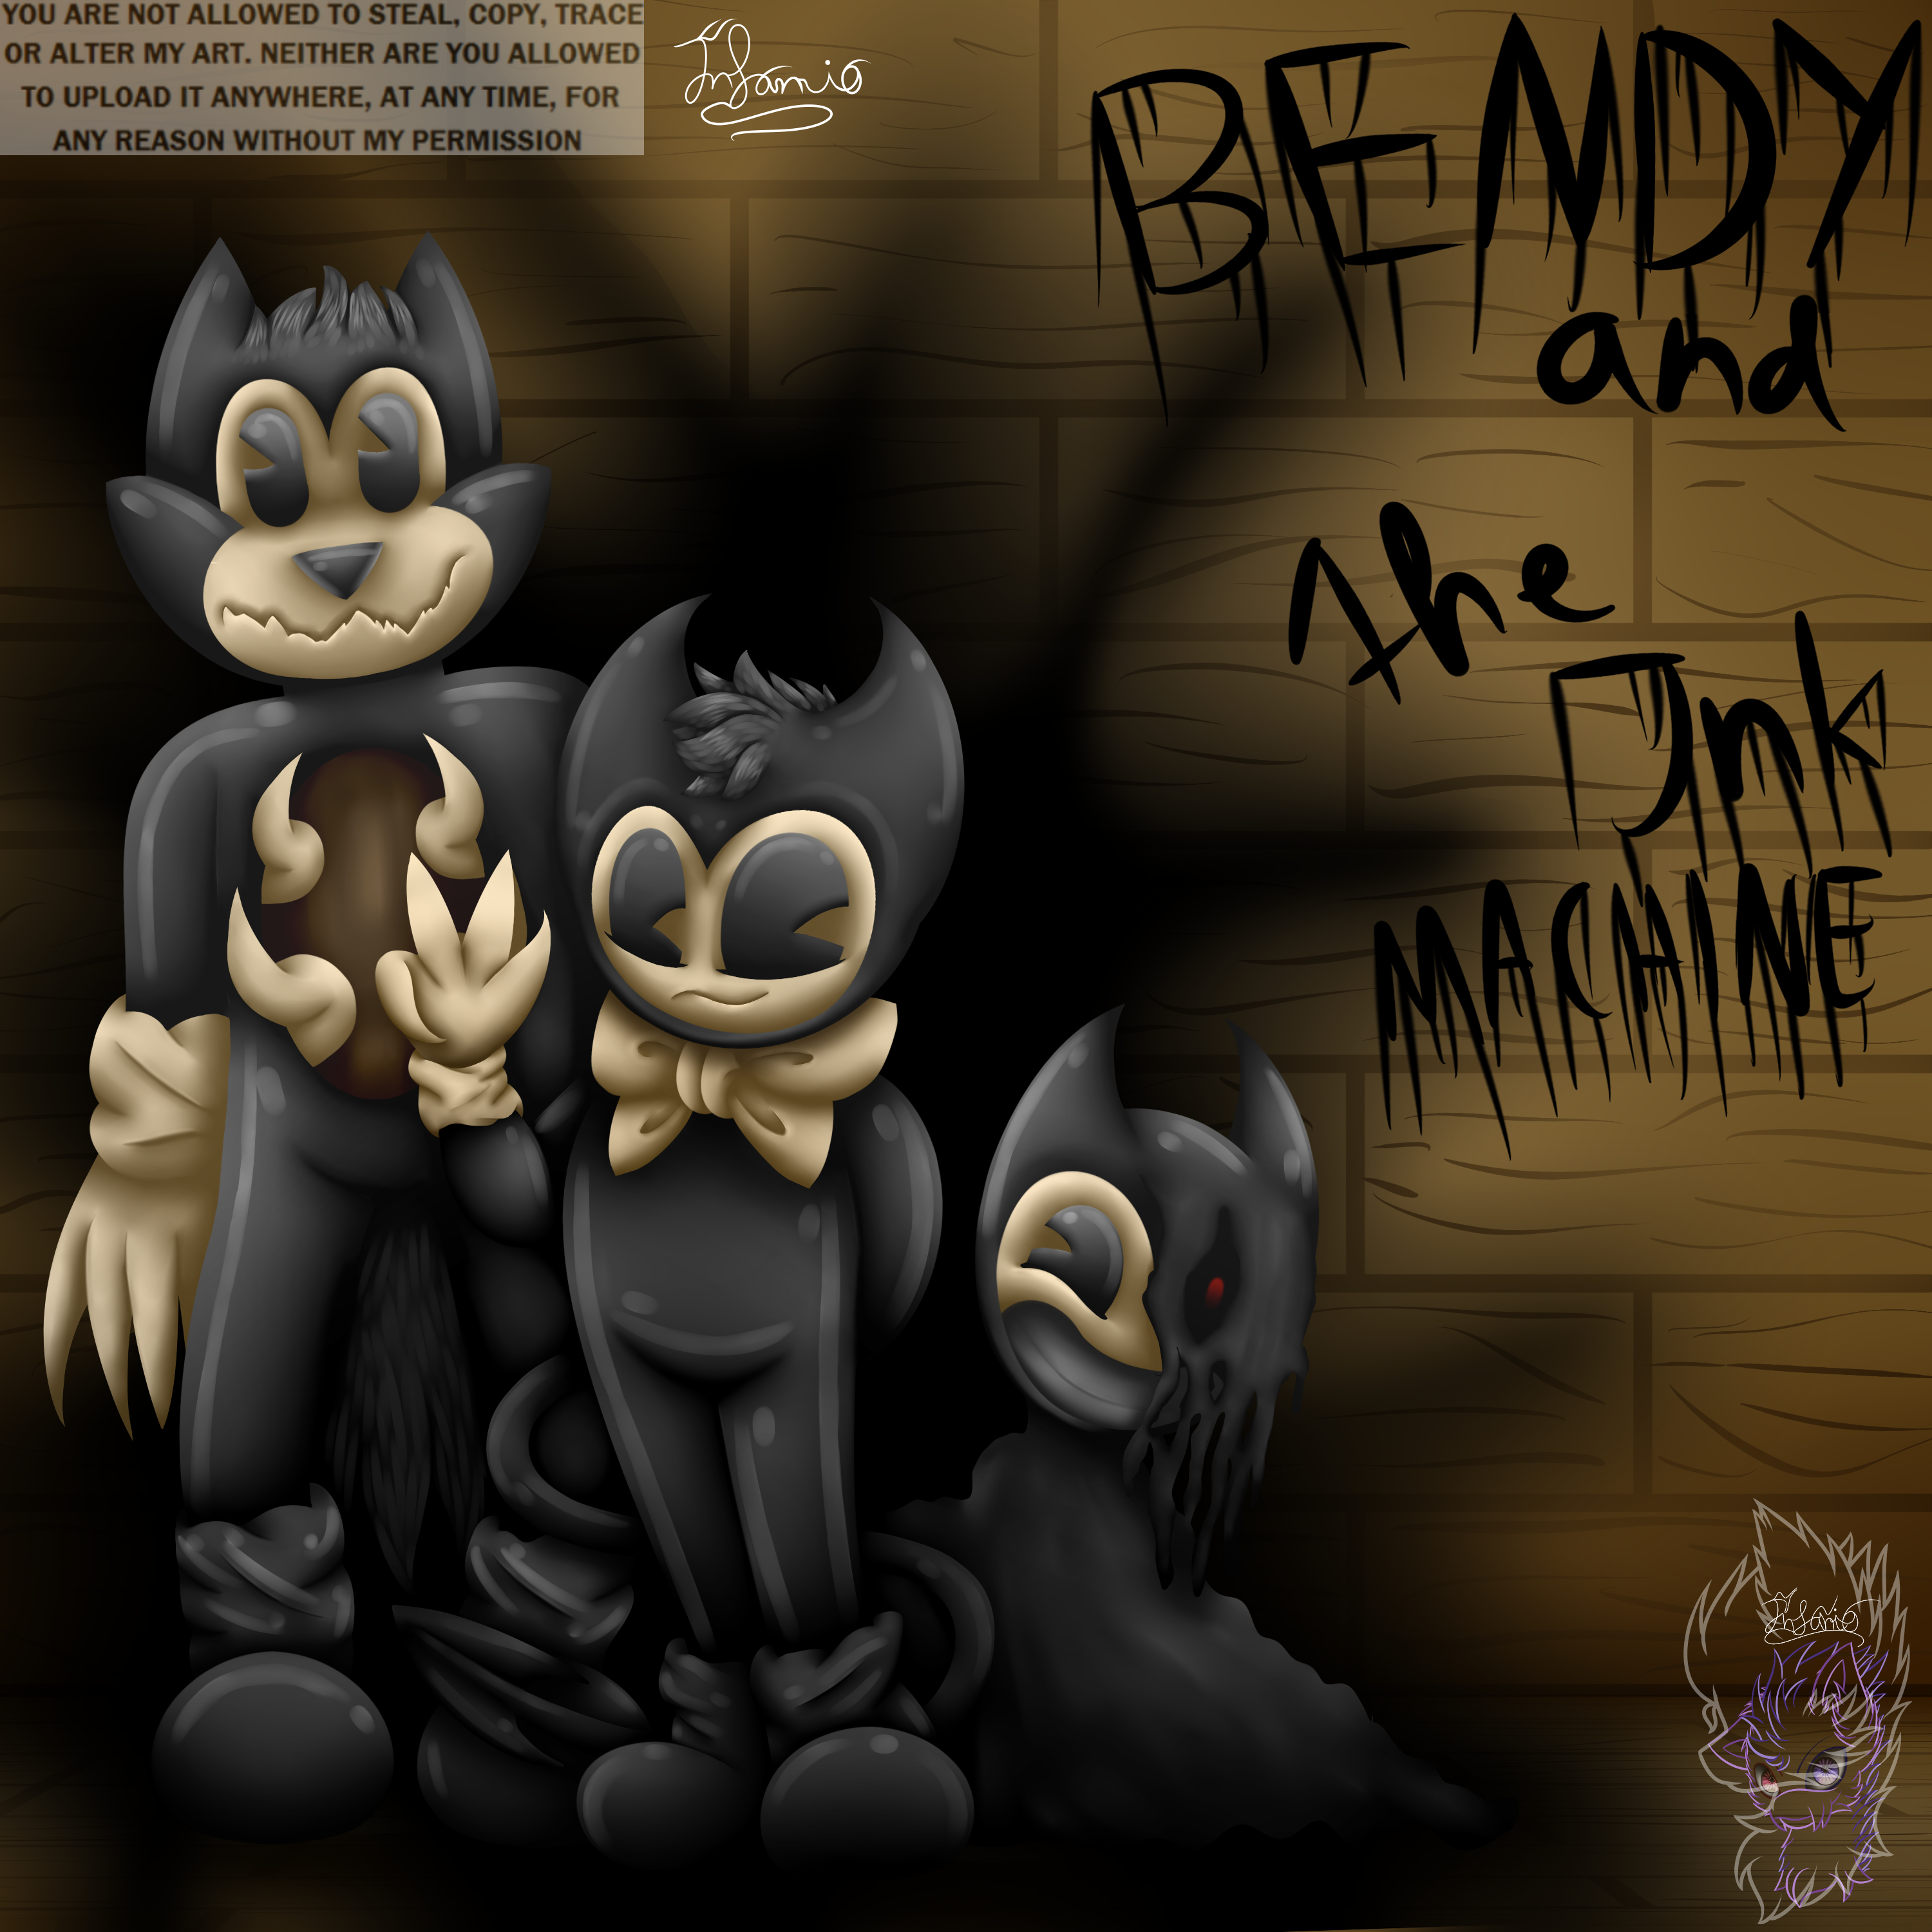 BENDY and the Ink Machine